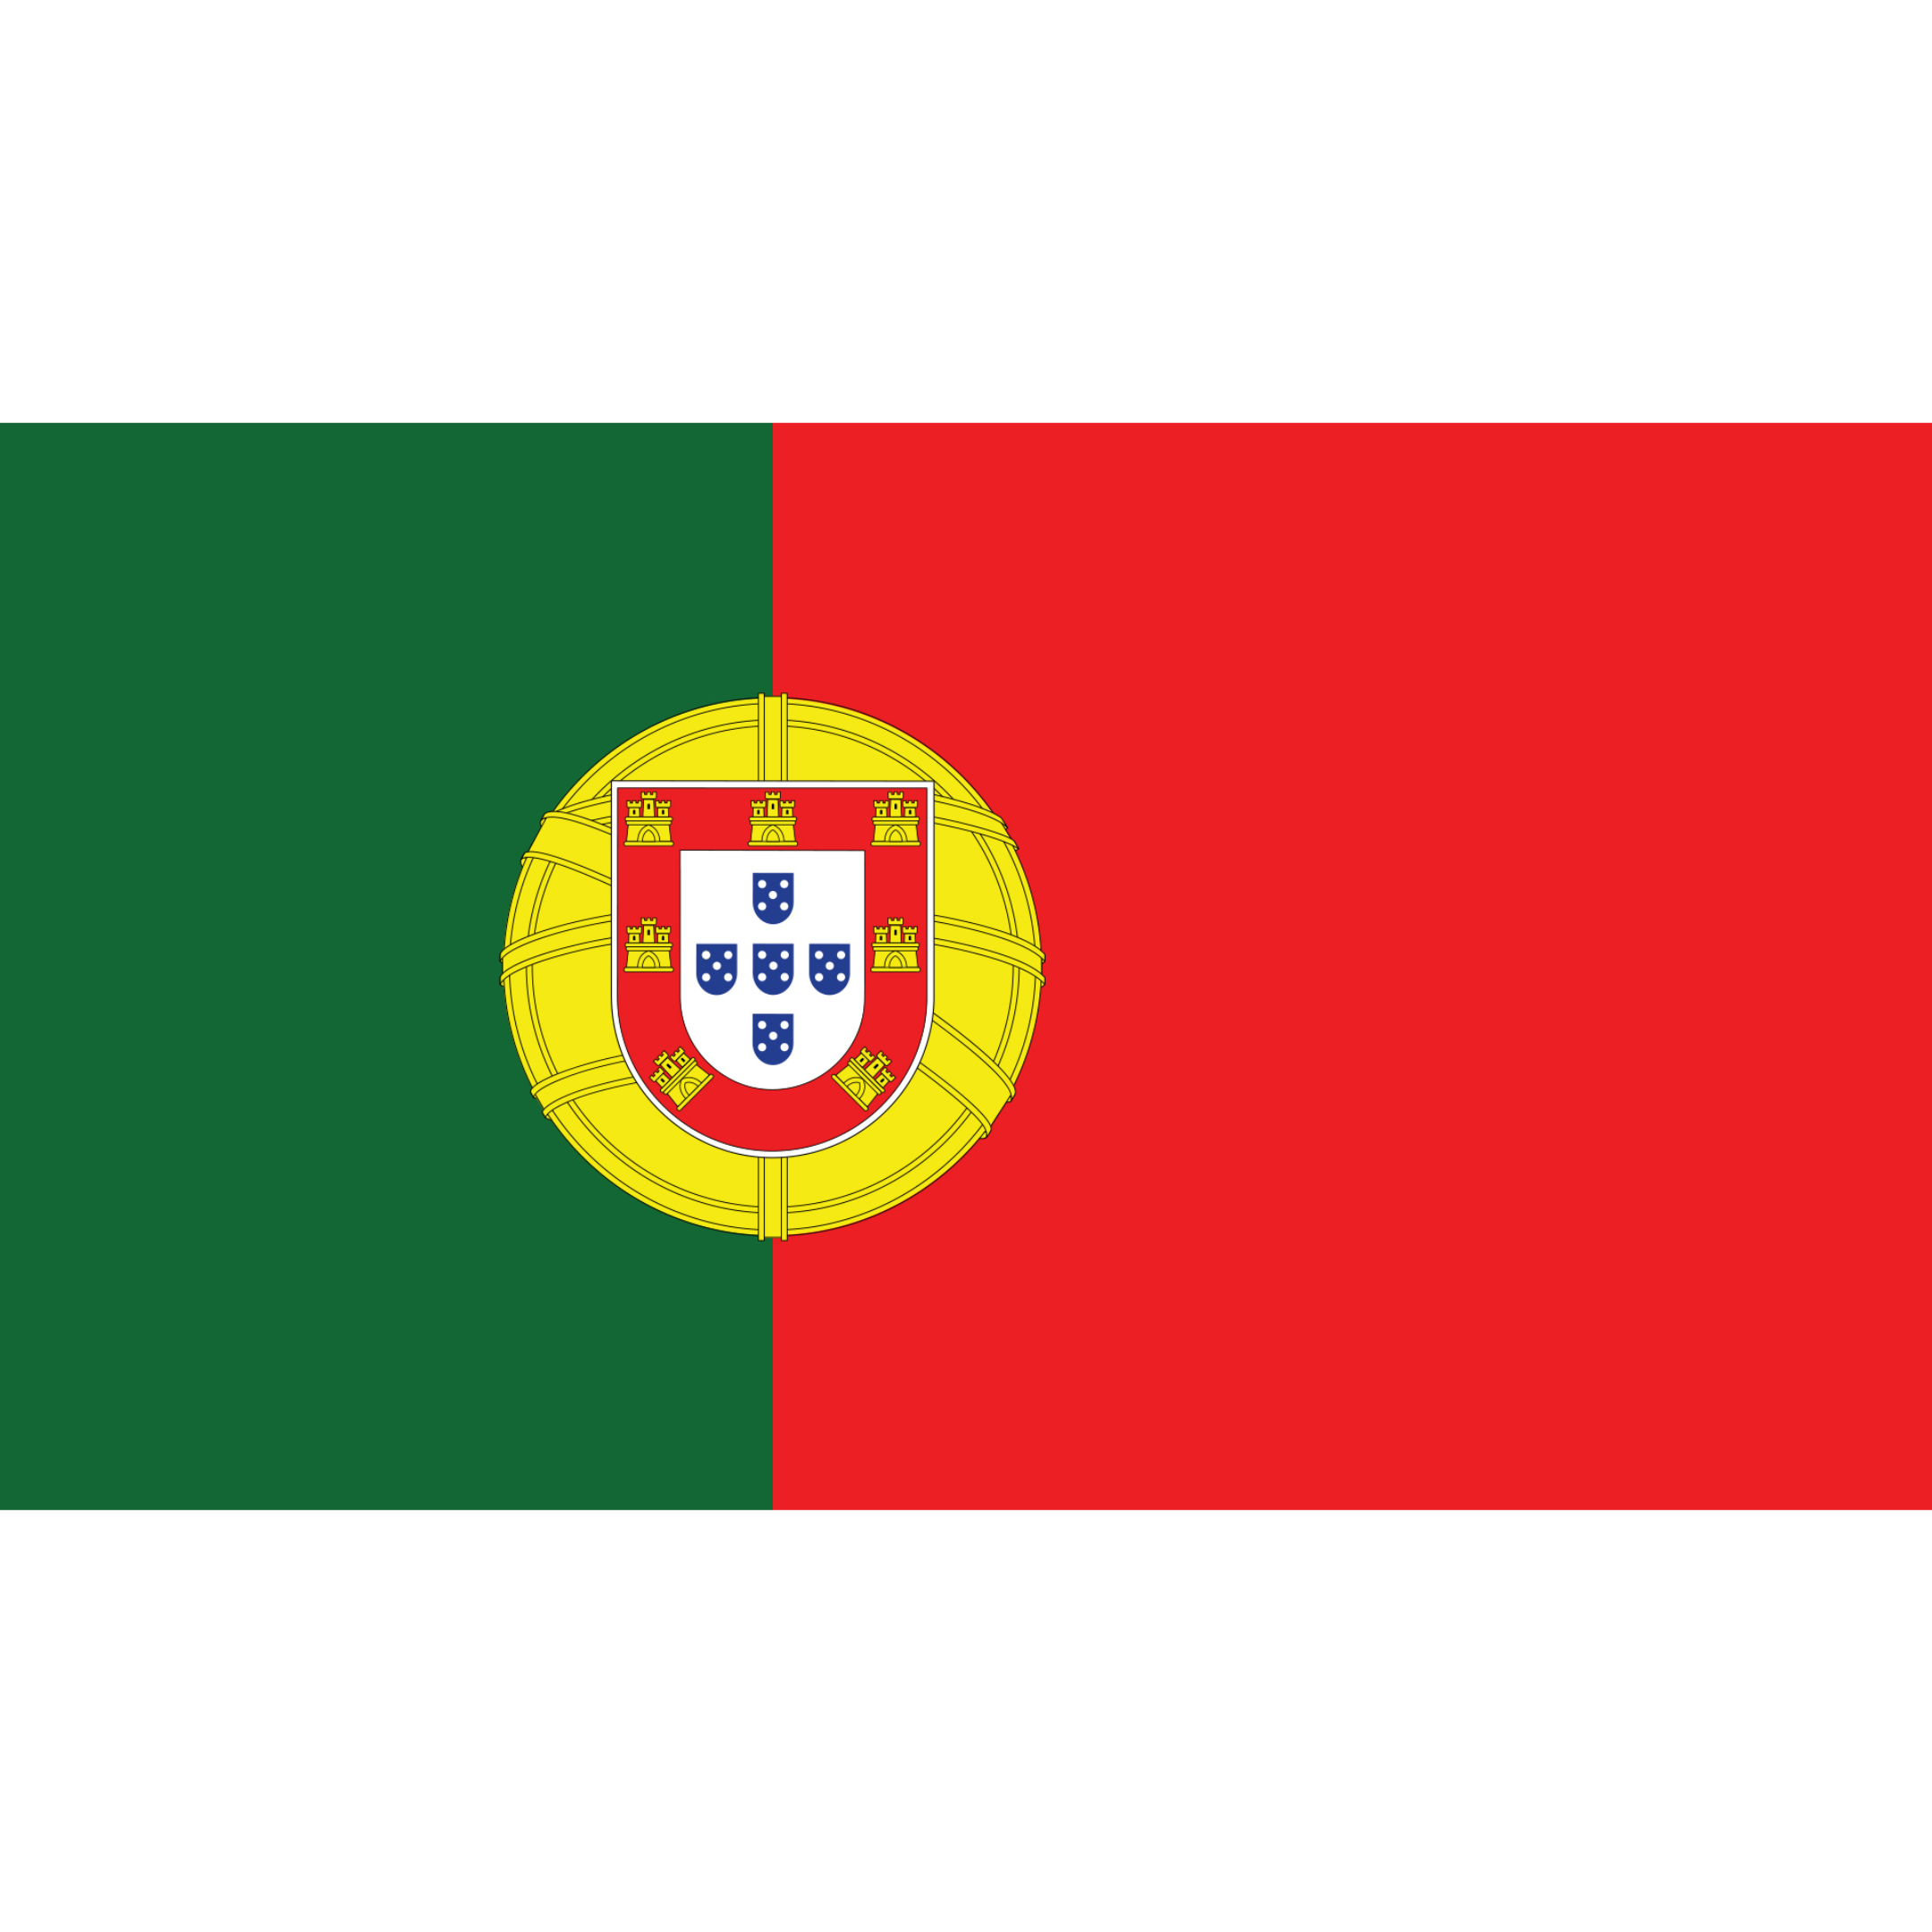 The Portuguese flag is divided into green on the right and red on the left, with the national coat of arms between them.